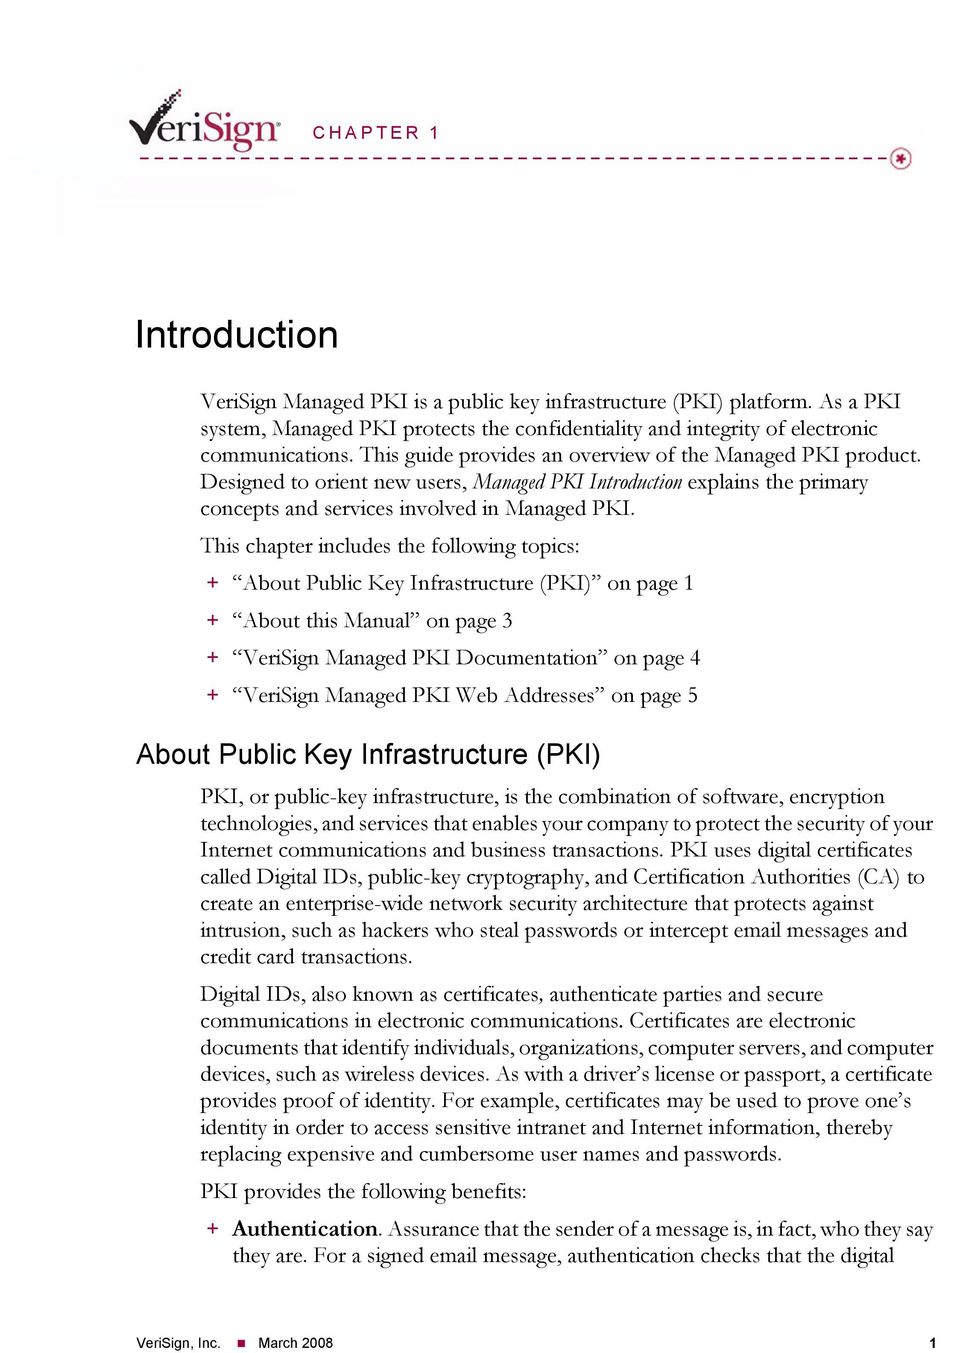 Designed to orient new users, Managed PKI Introduction explains the primary concepts and services involved in Managed PKI.